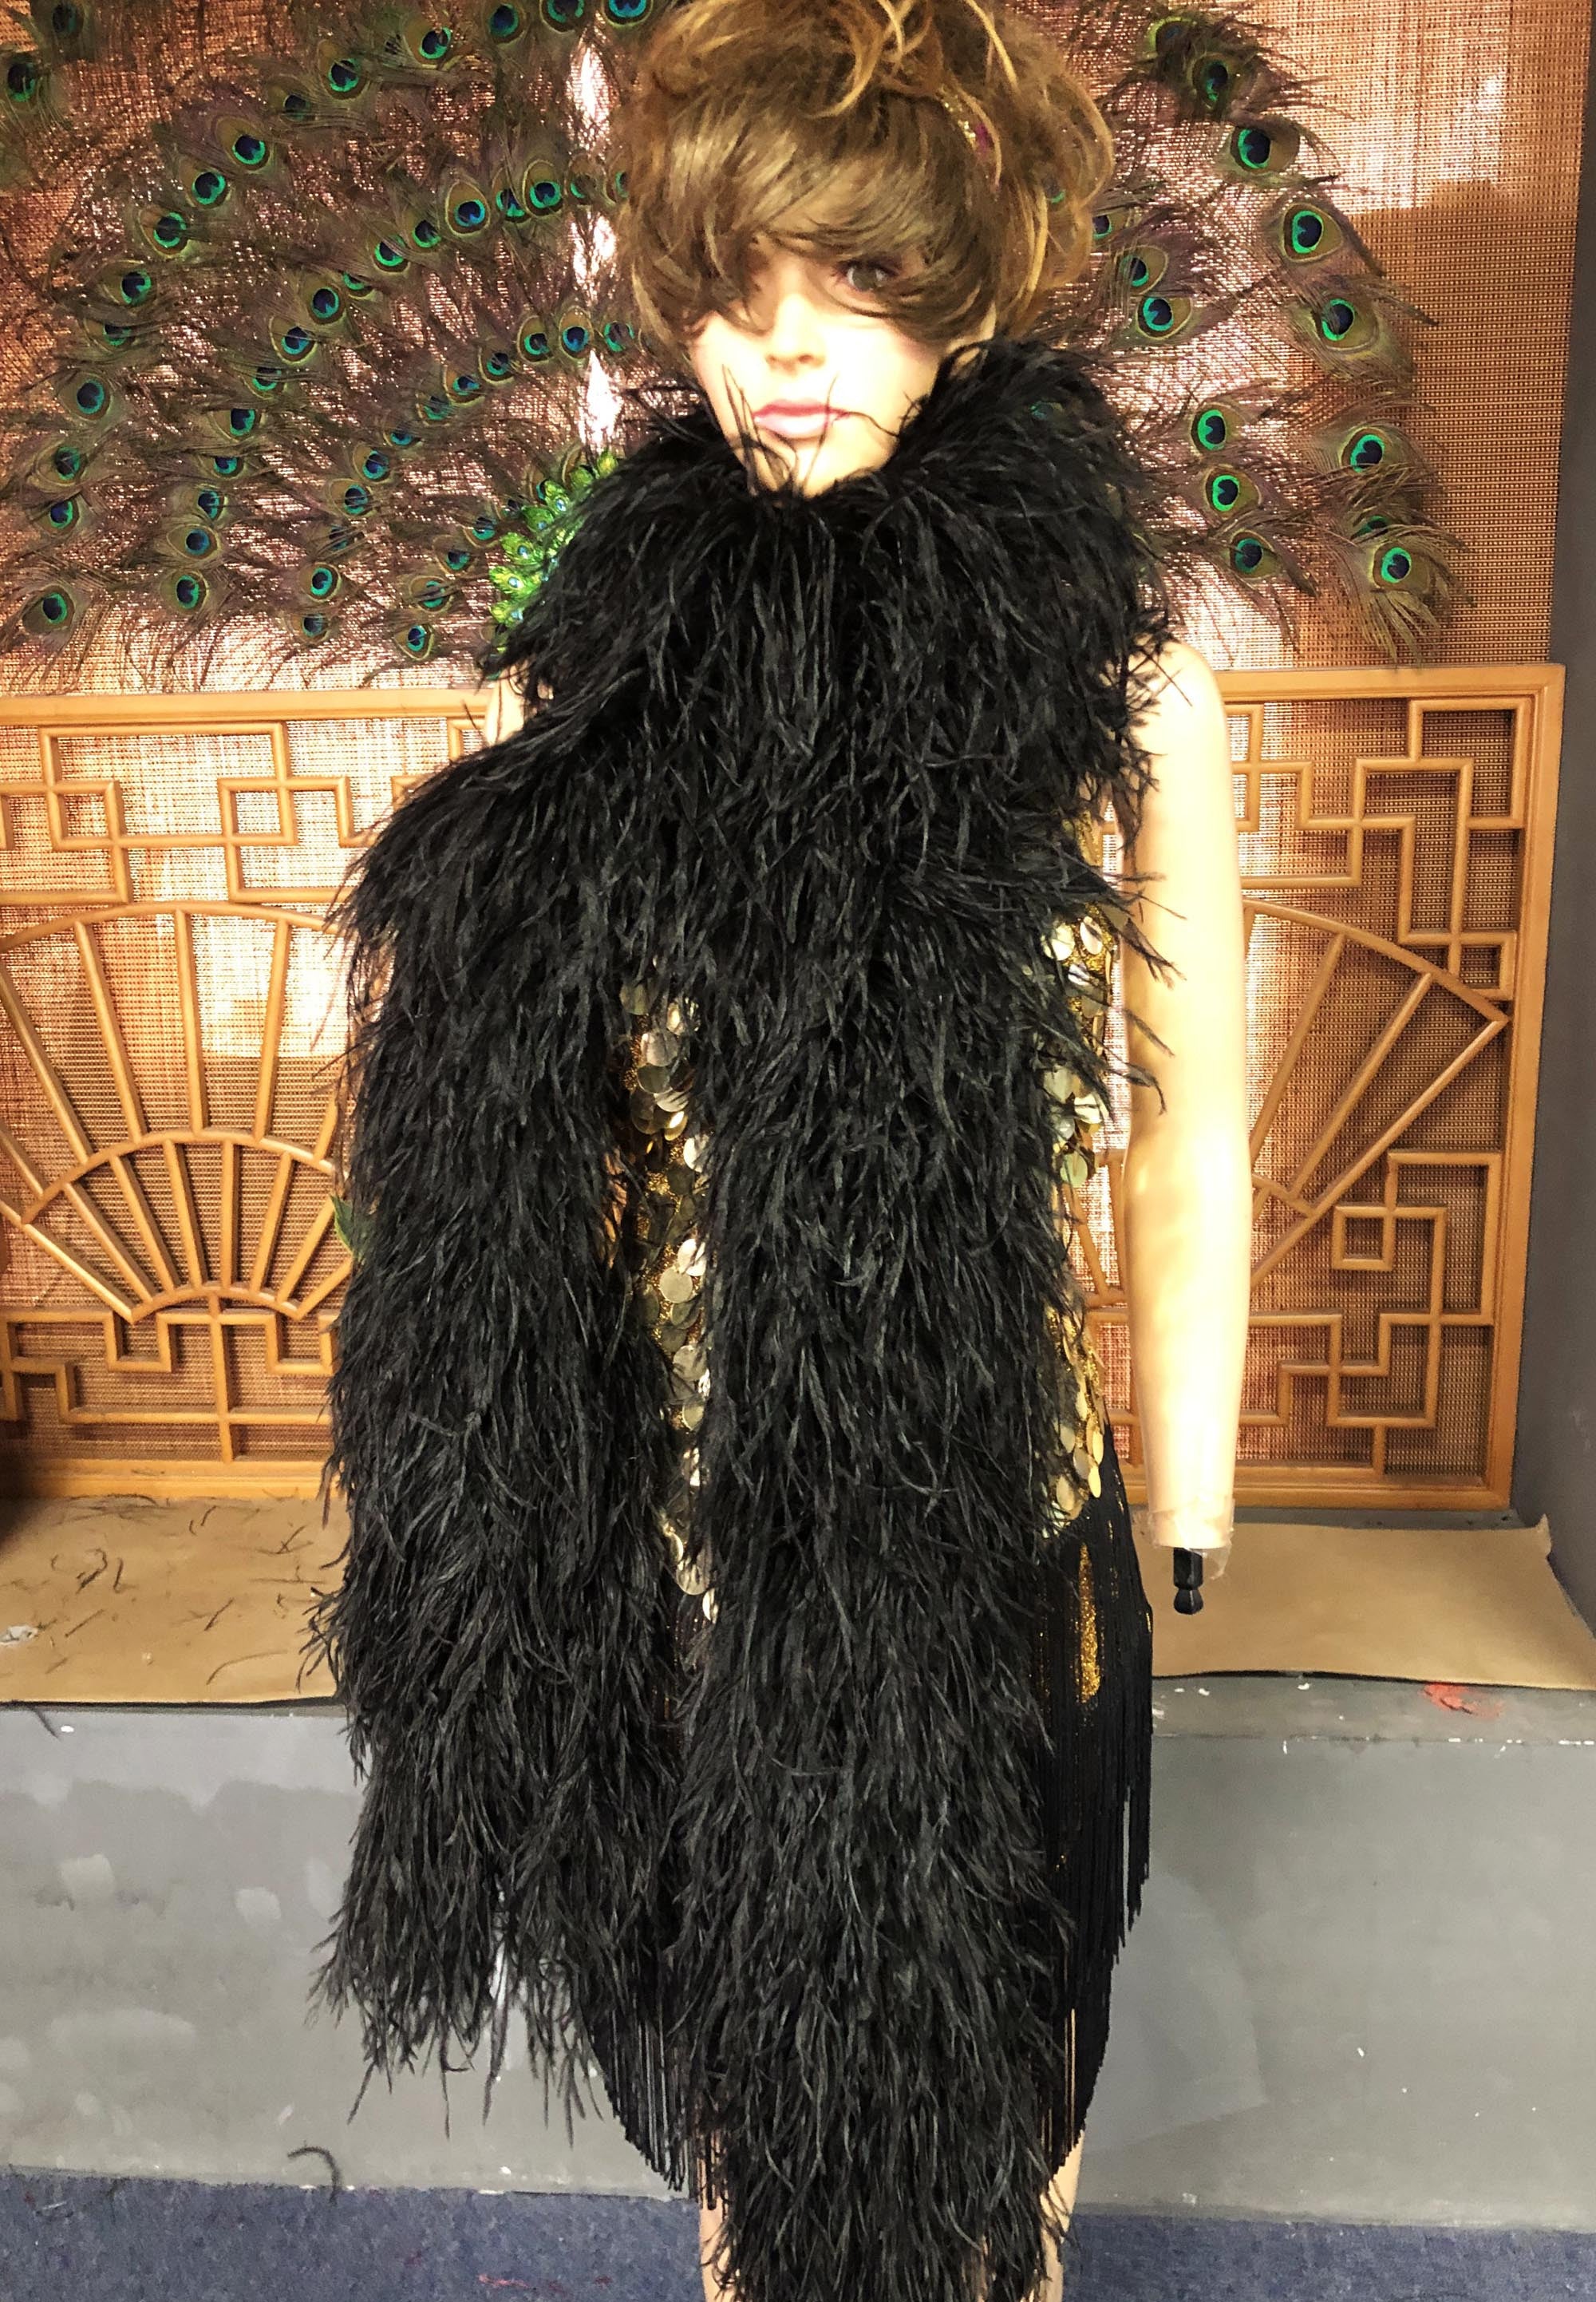 StyleFabric White Feather Boa Ostrich Feathers Boa Black Feather Boa Craft Feathers Color Feathers Black Feathers Dress Feather Ostrich Boa Feathers